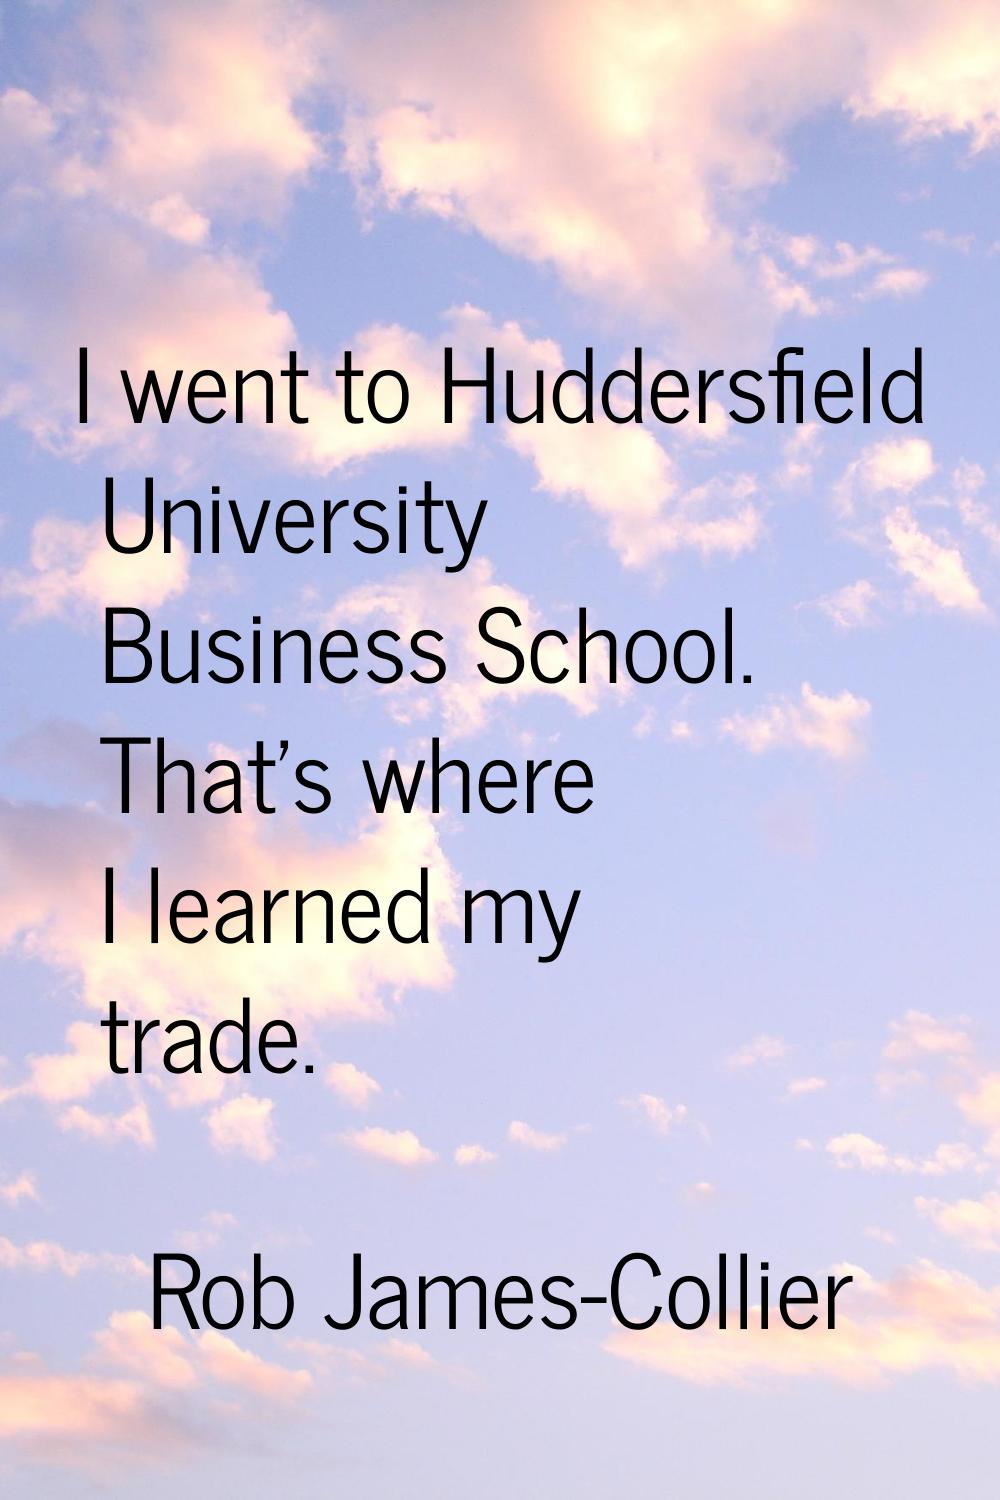 I went to Huddersfield University Business School. That's where I learned my trade.